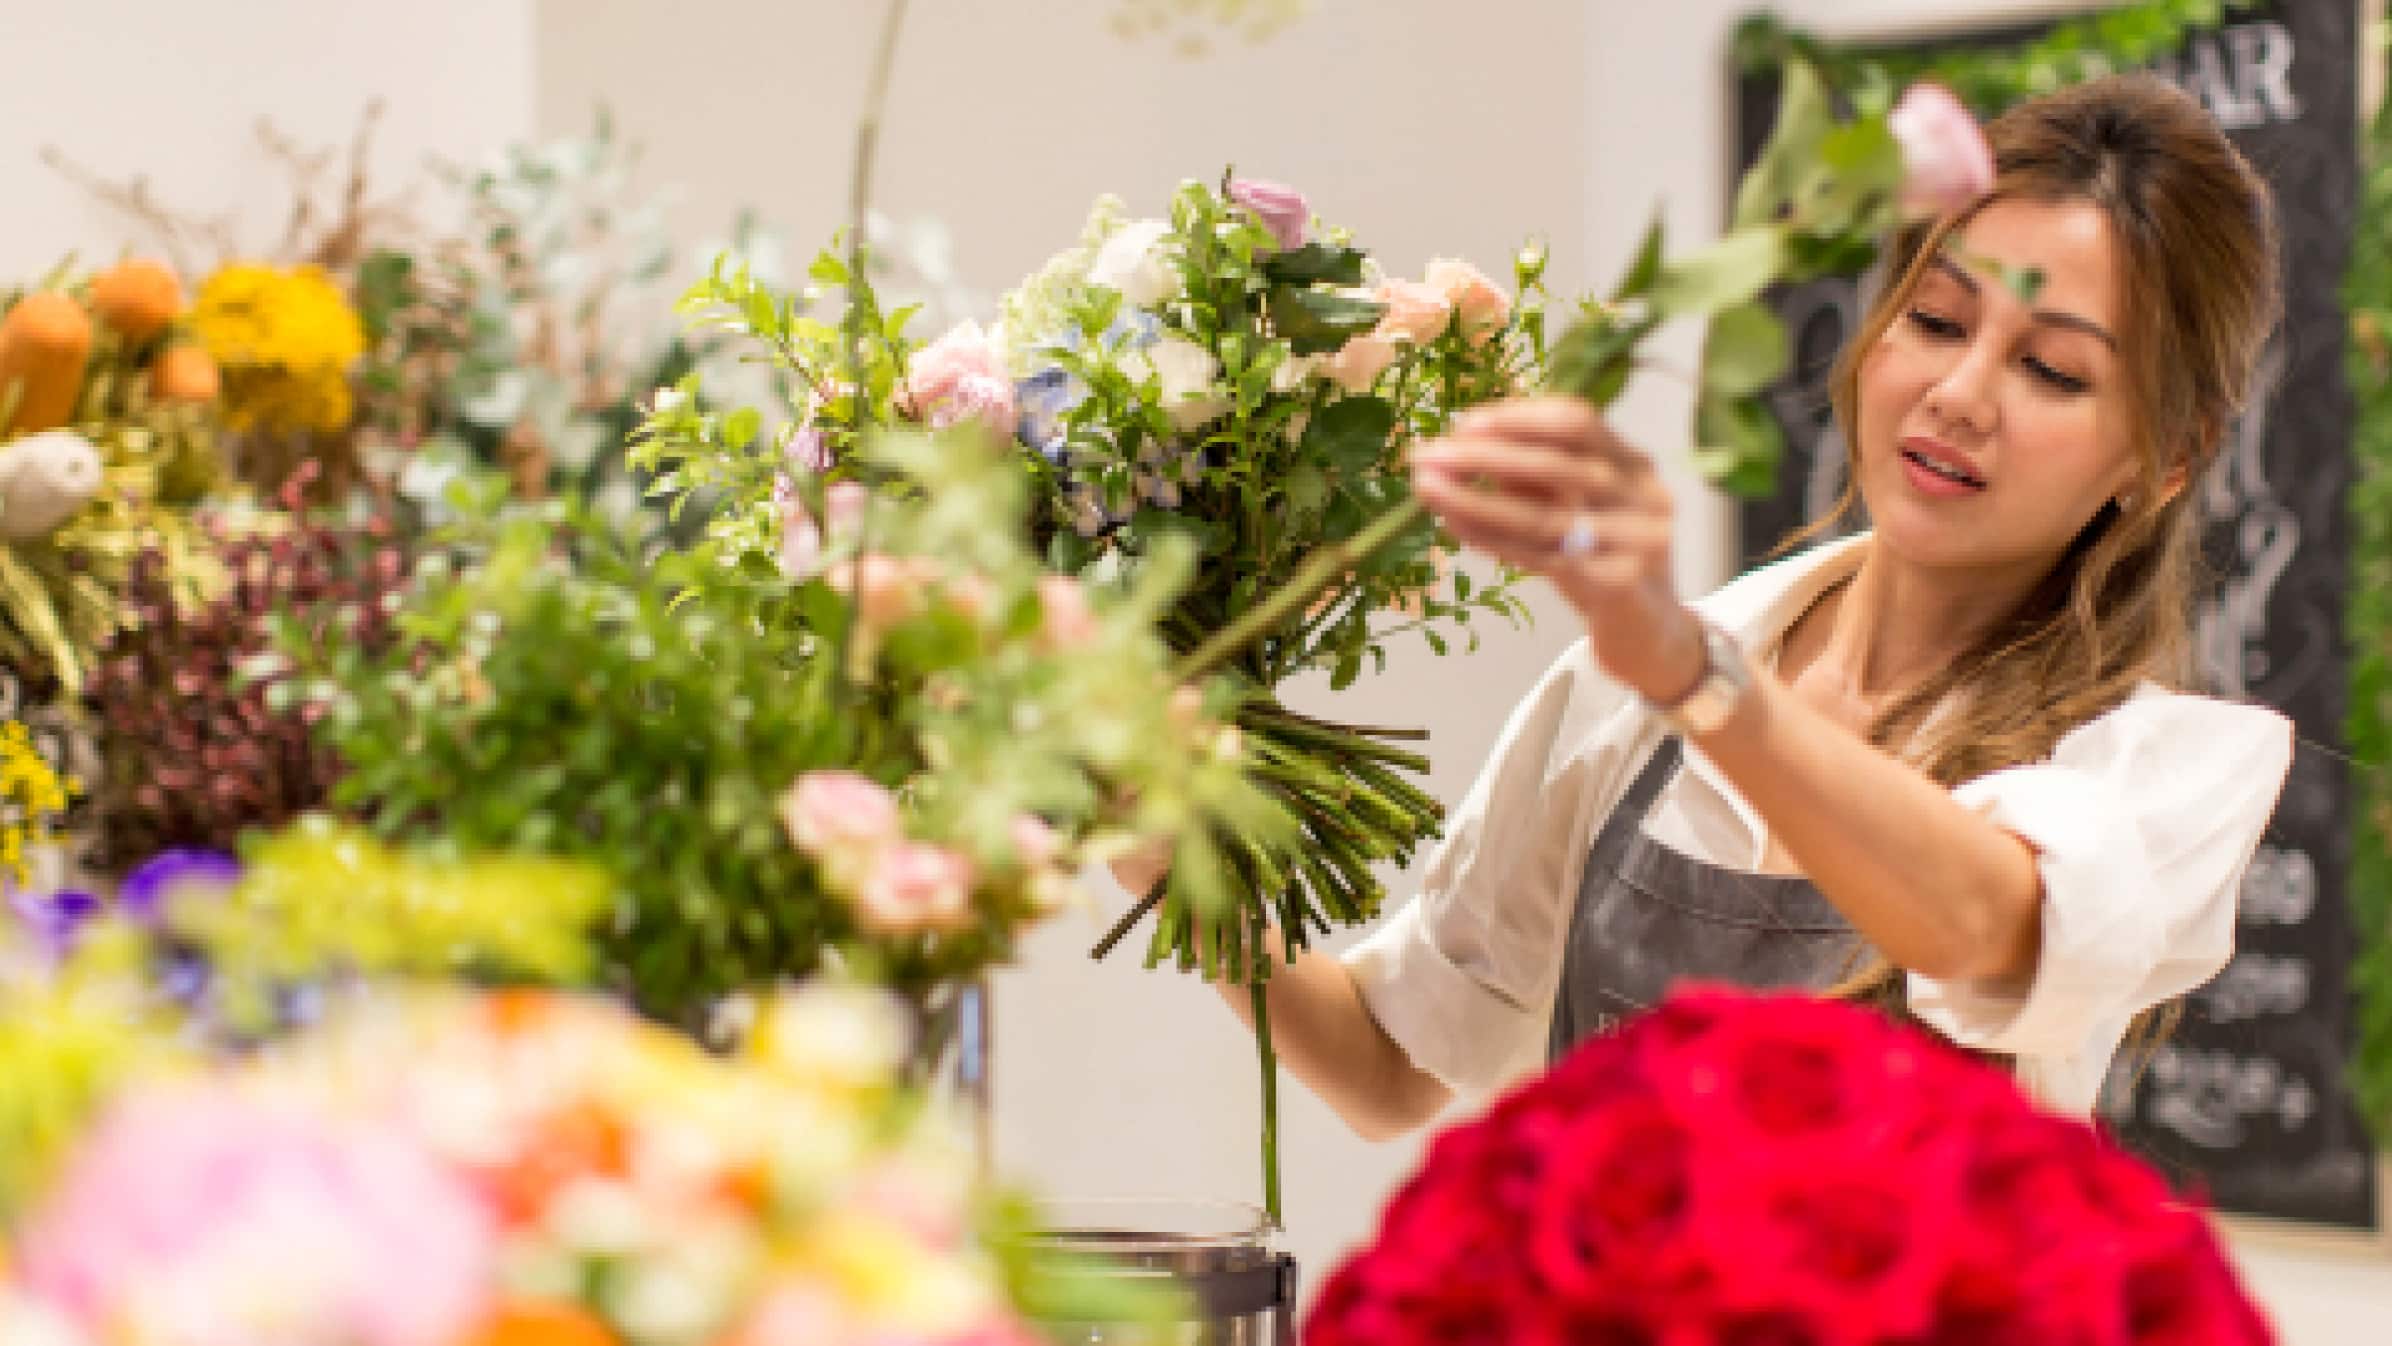 Lelian Chew, founder of The Florist Atelier, arranging flowers in her store.